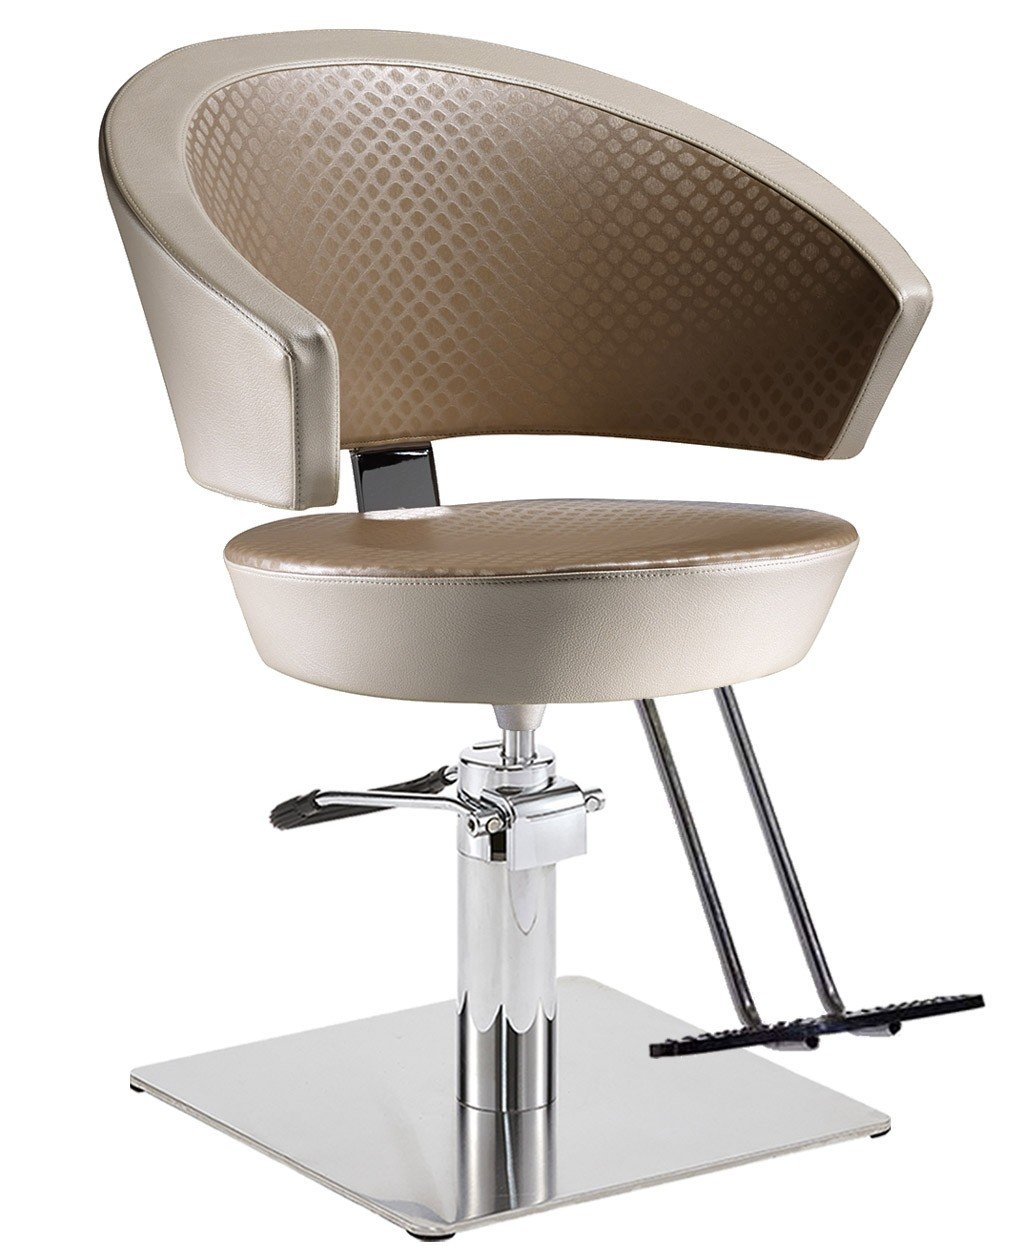 Salon Ambience SH-310 Flute Styling Chair